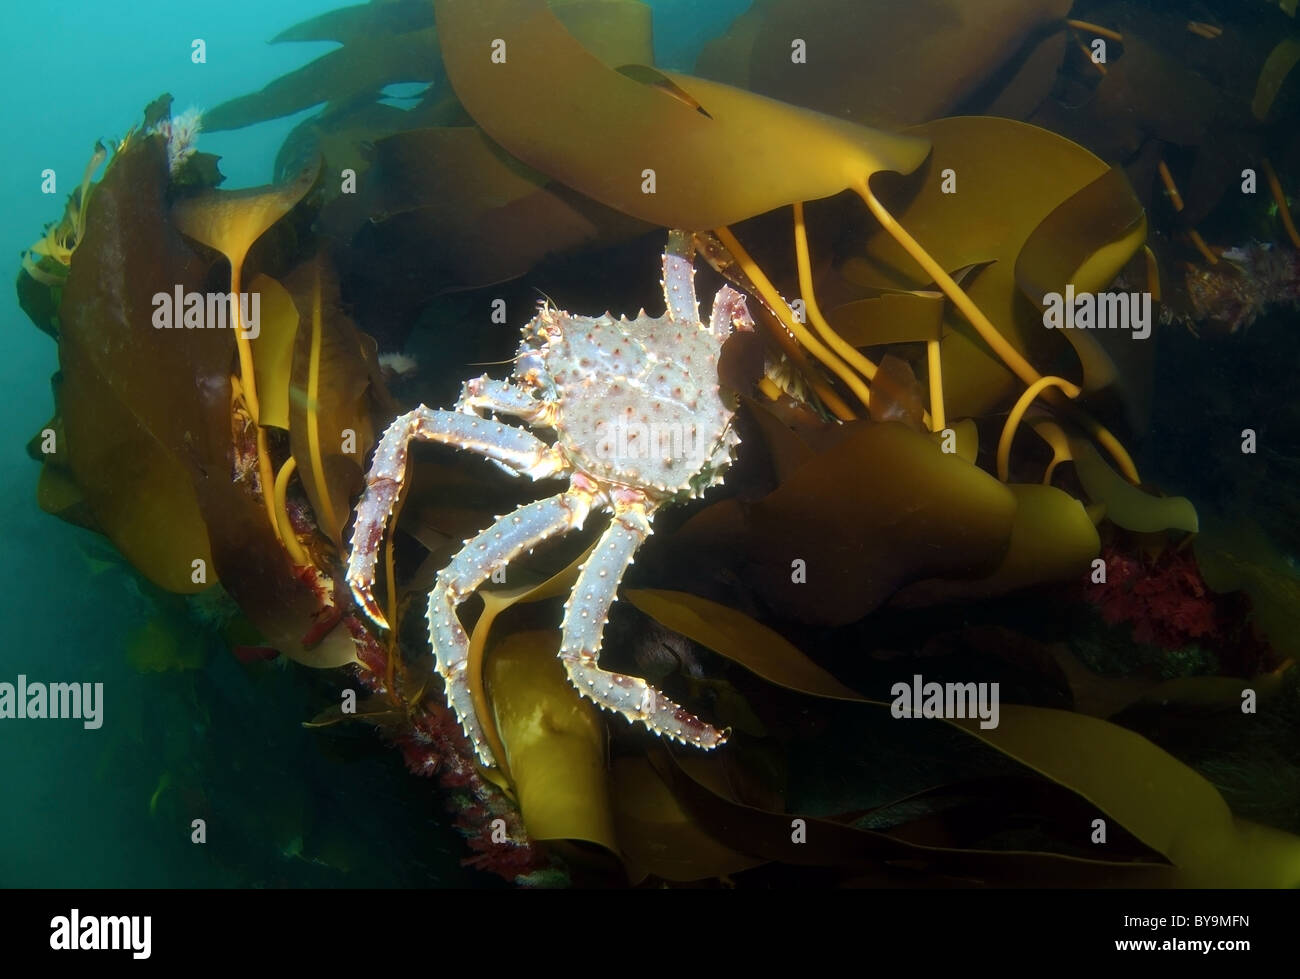 Red King Crab Paralithodes camtschaticus Foto Stock